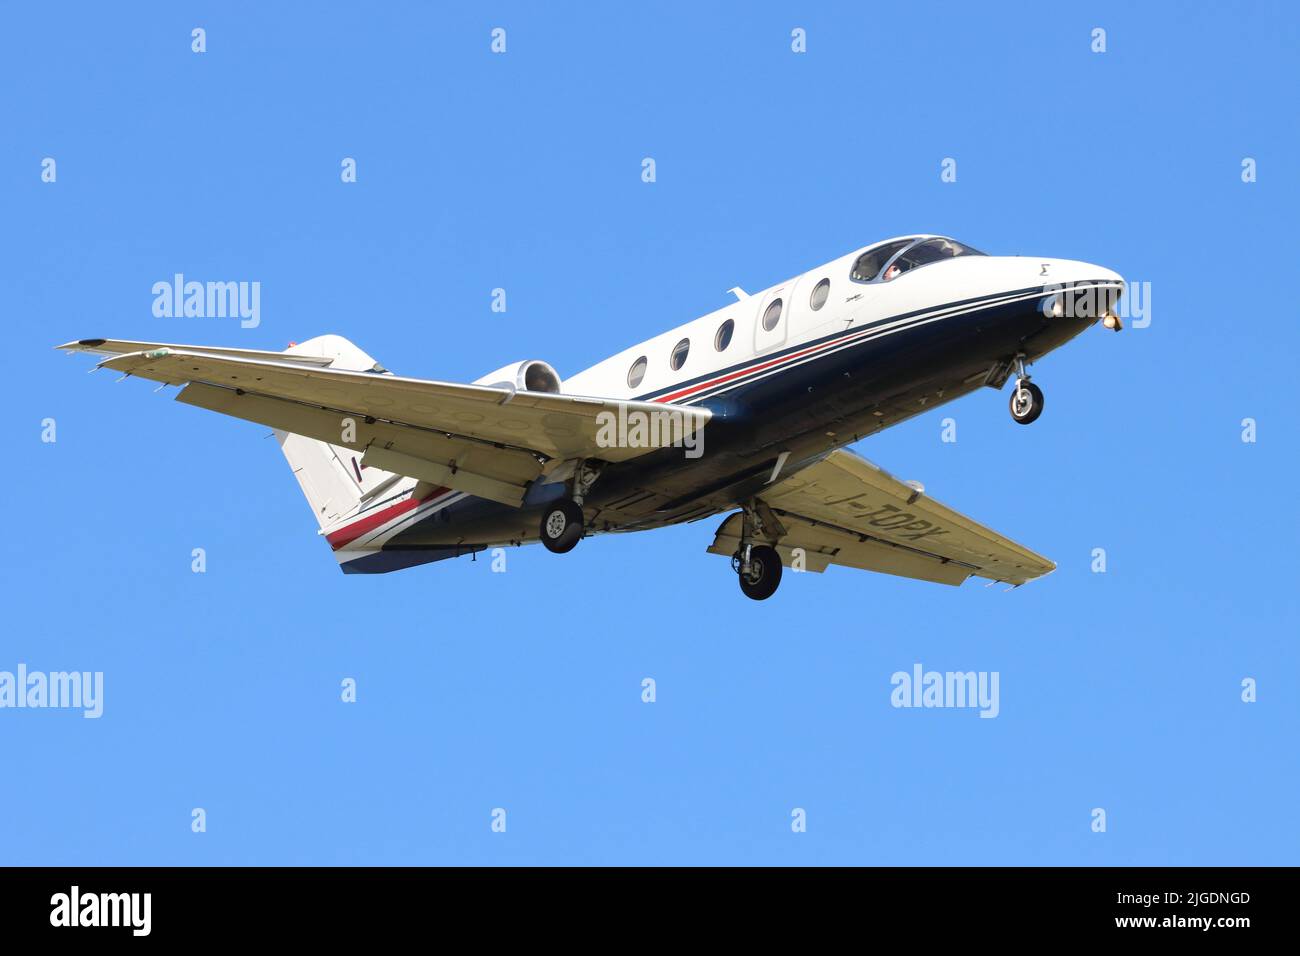 Hawker Beechcraft 400 XP, I-TOPX, landing at Stansted Airport, Essex, UK Stock Photo